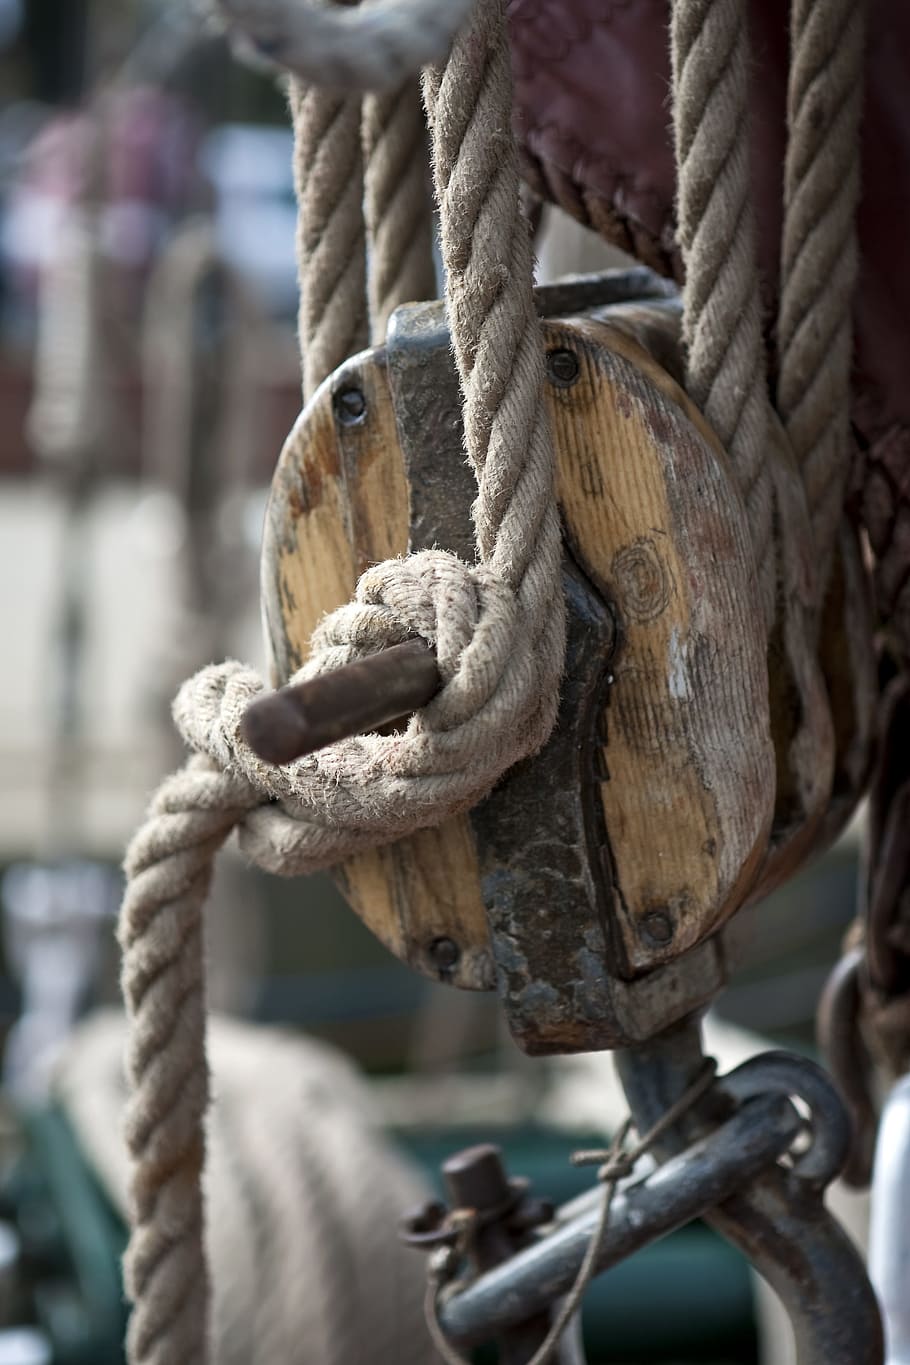 rope, knot, sailing, sailor's knot, block and tackle, wood, strength, focus on foreground, tied up, close-up